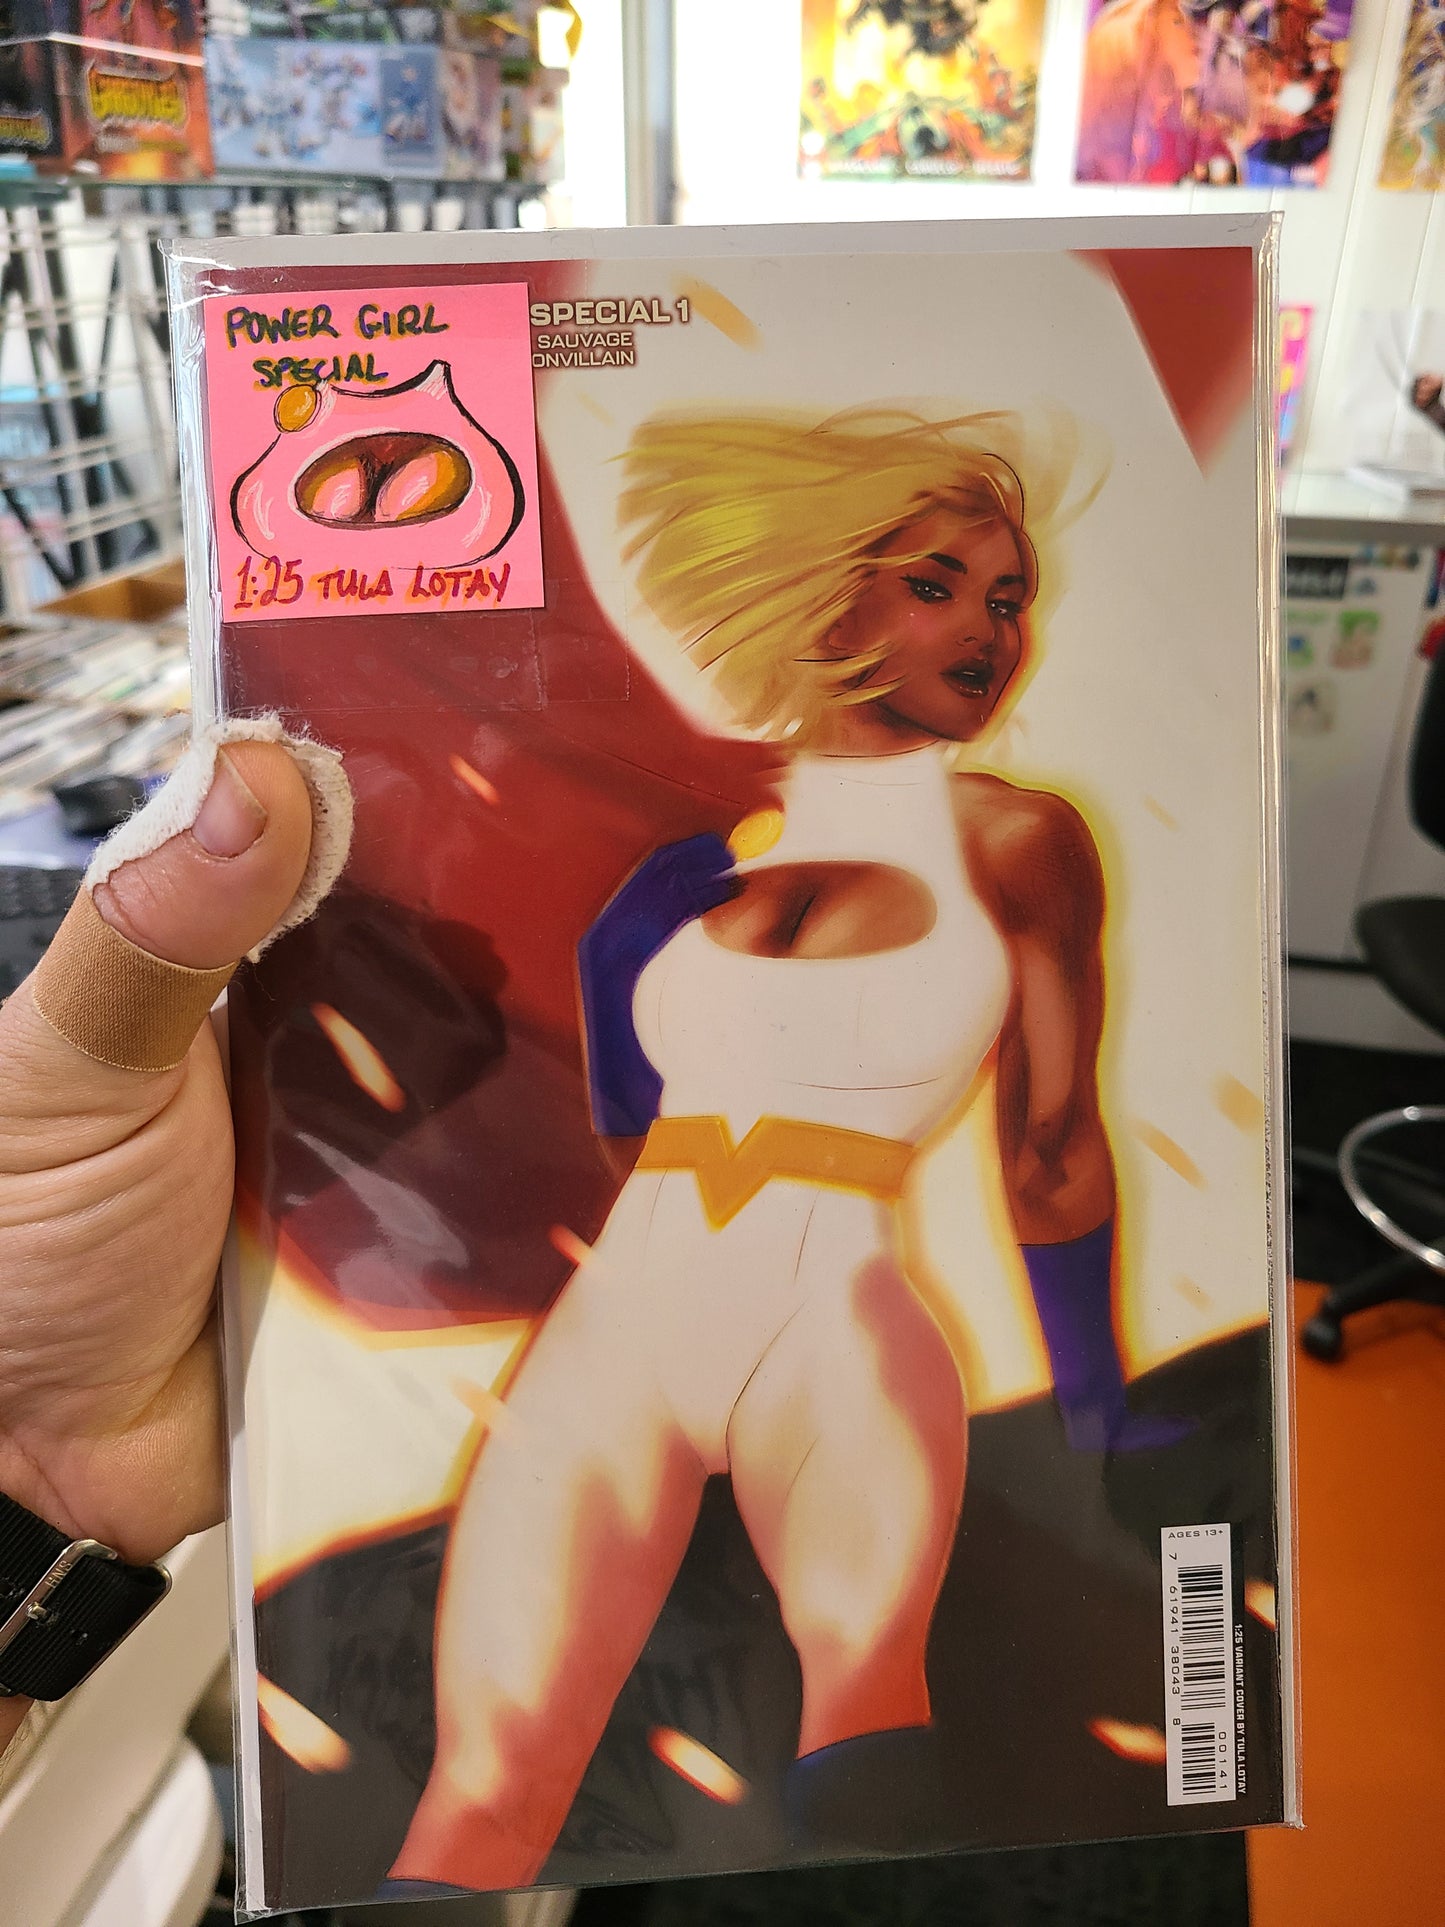 POWER GIRL SPECIAL #1 1:25 BY TULA LOTAY